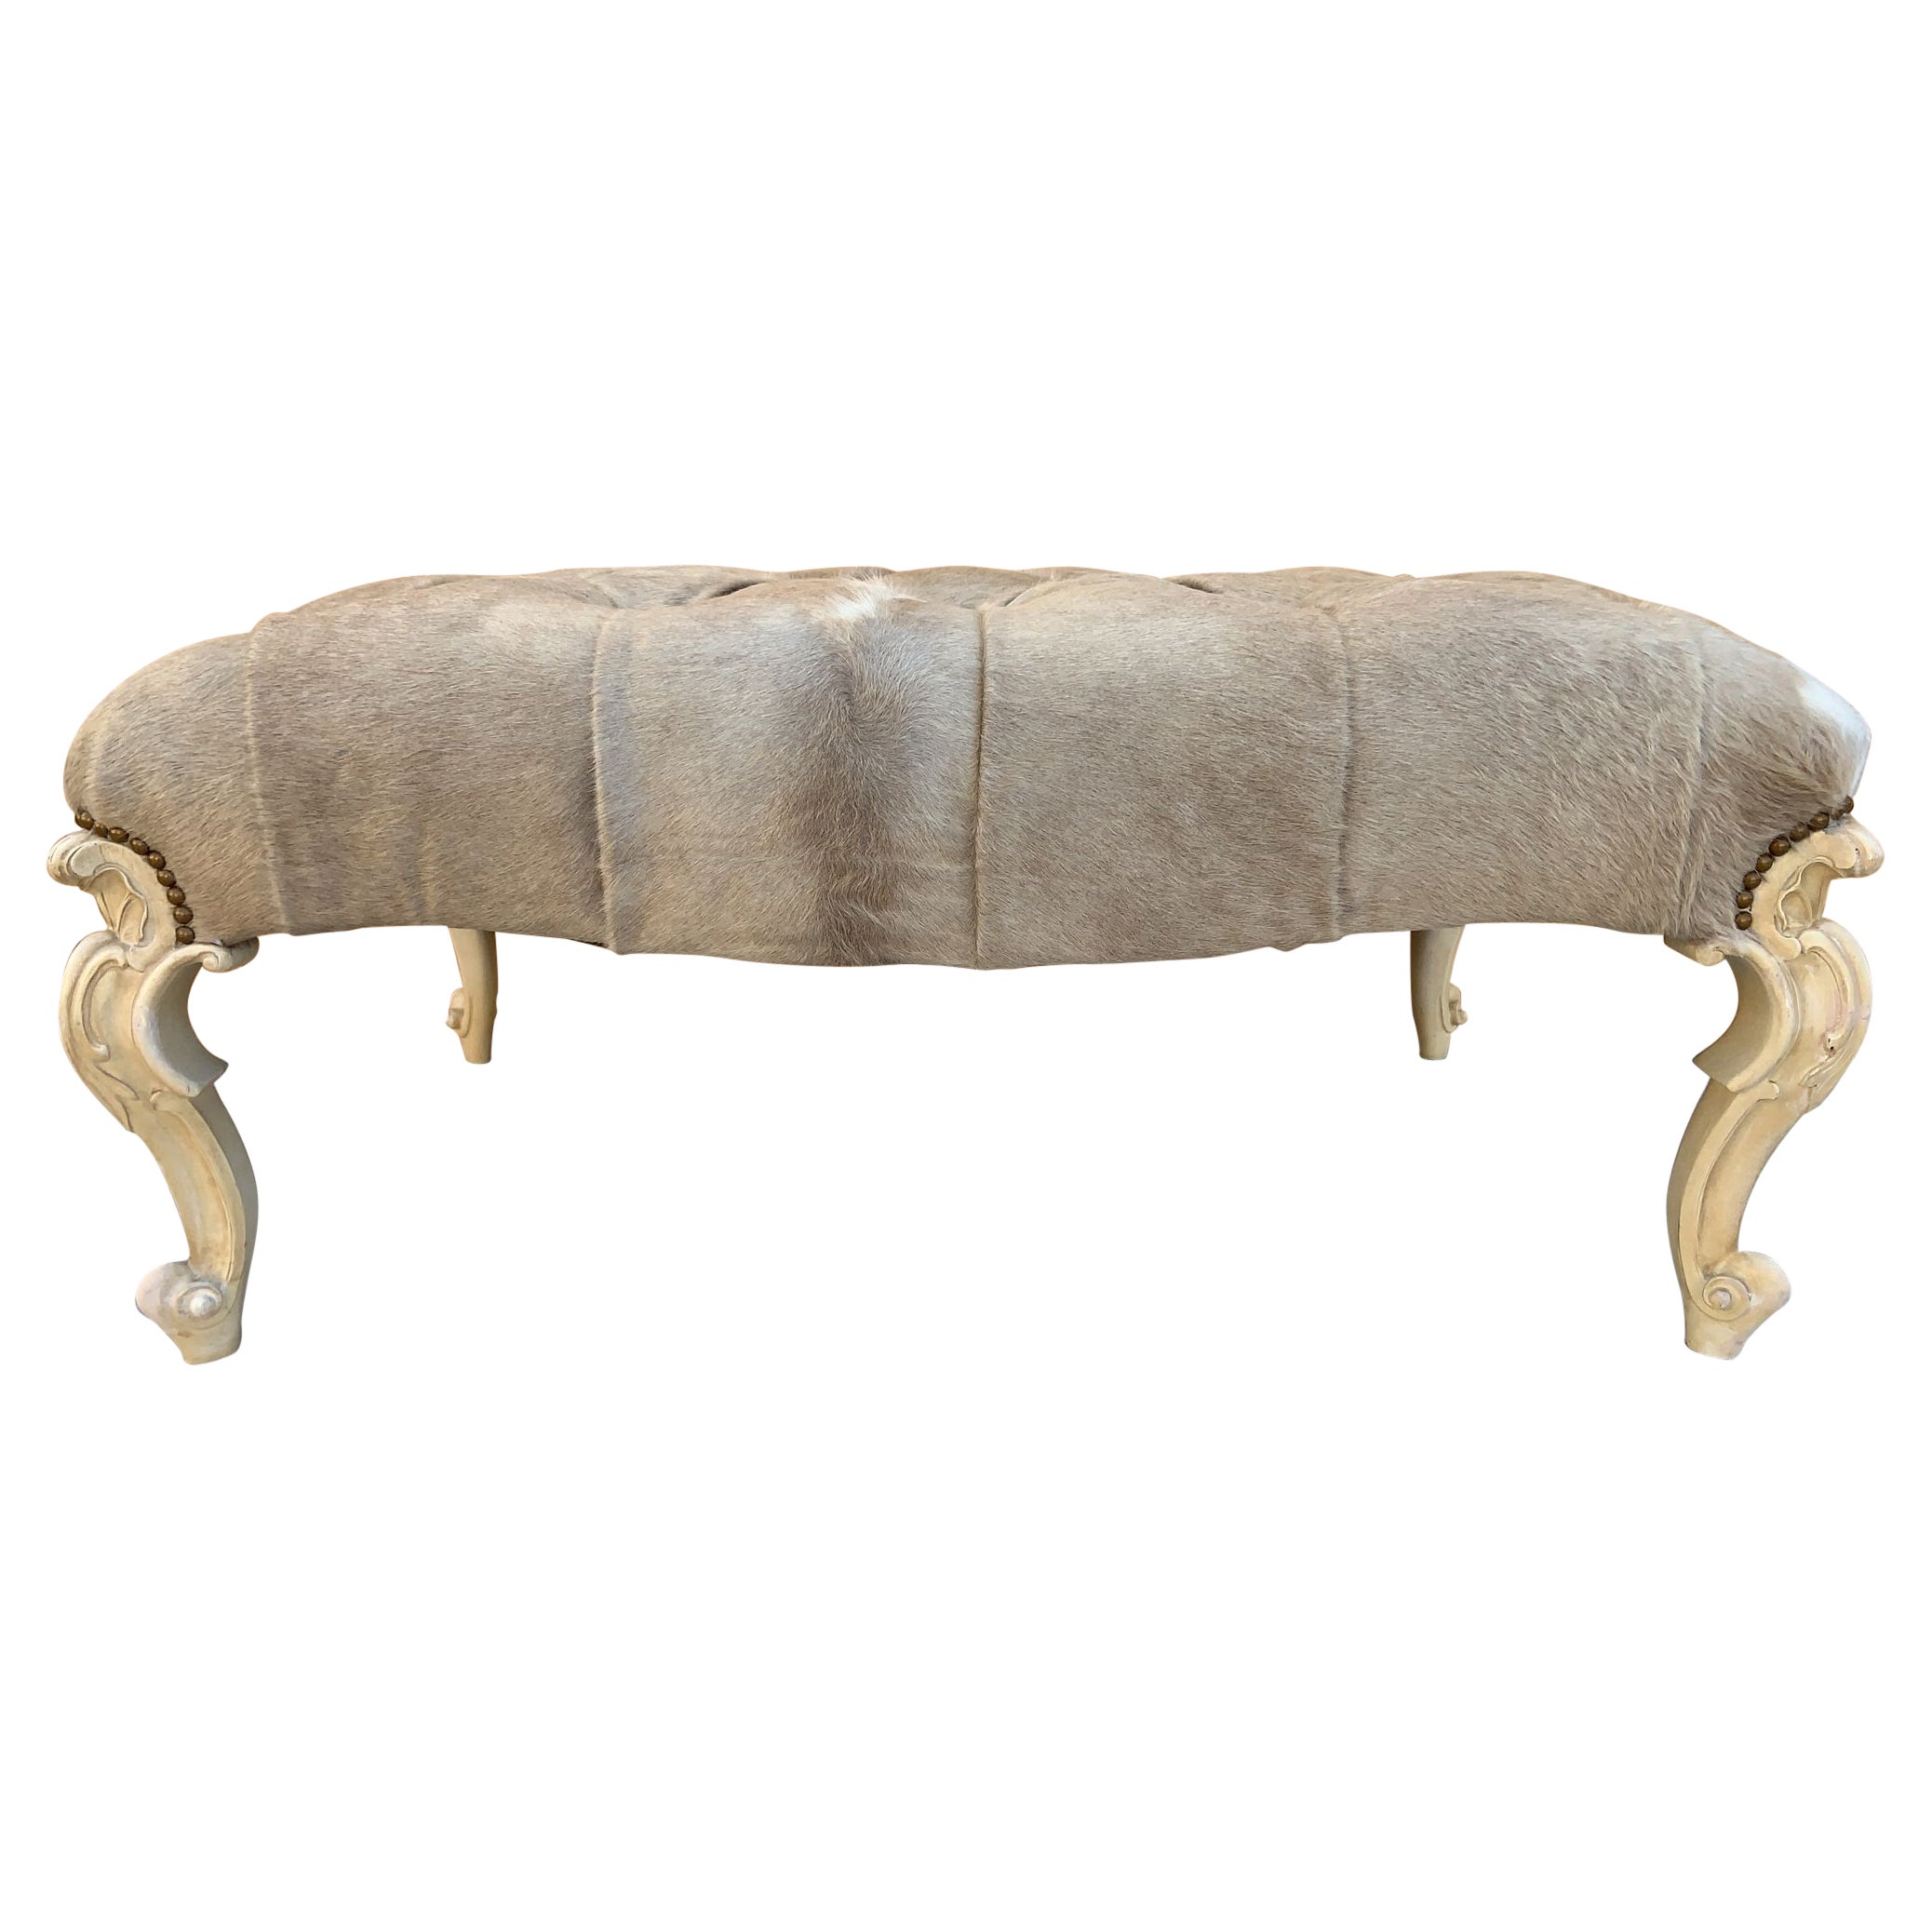 French Provincial Style Ottoman with Hand Carved Cabriole Legs Newly Upholstered